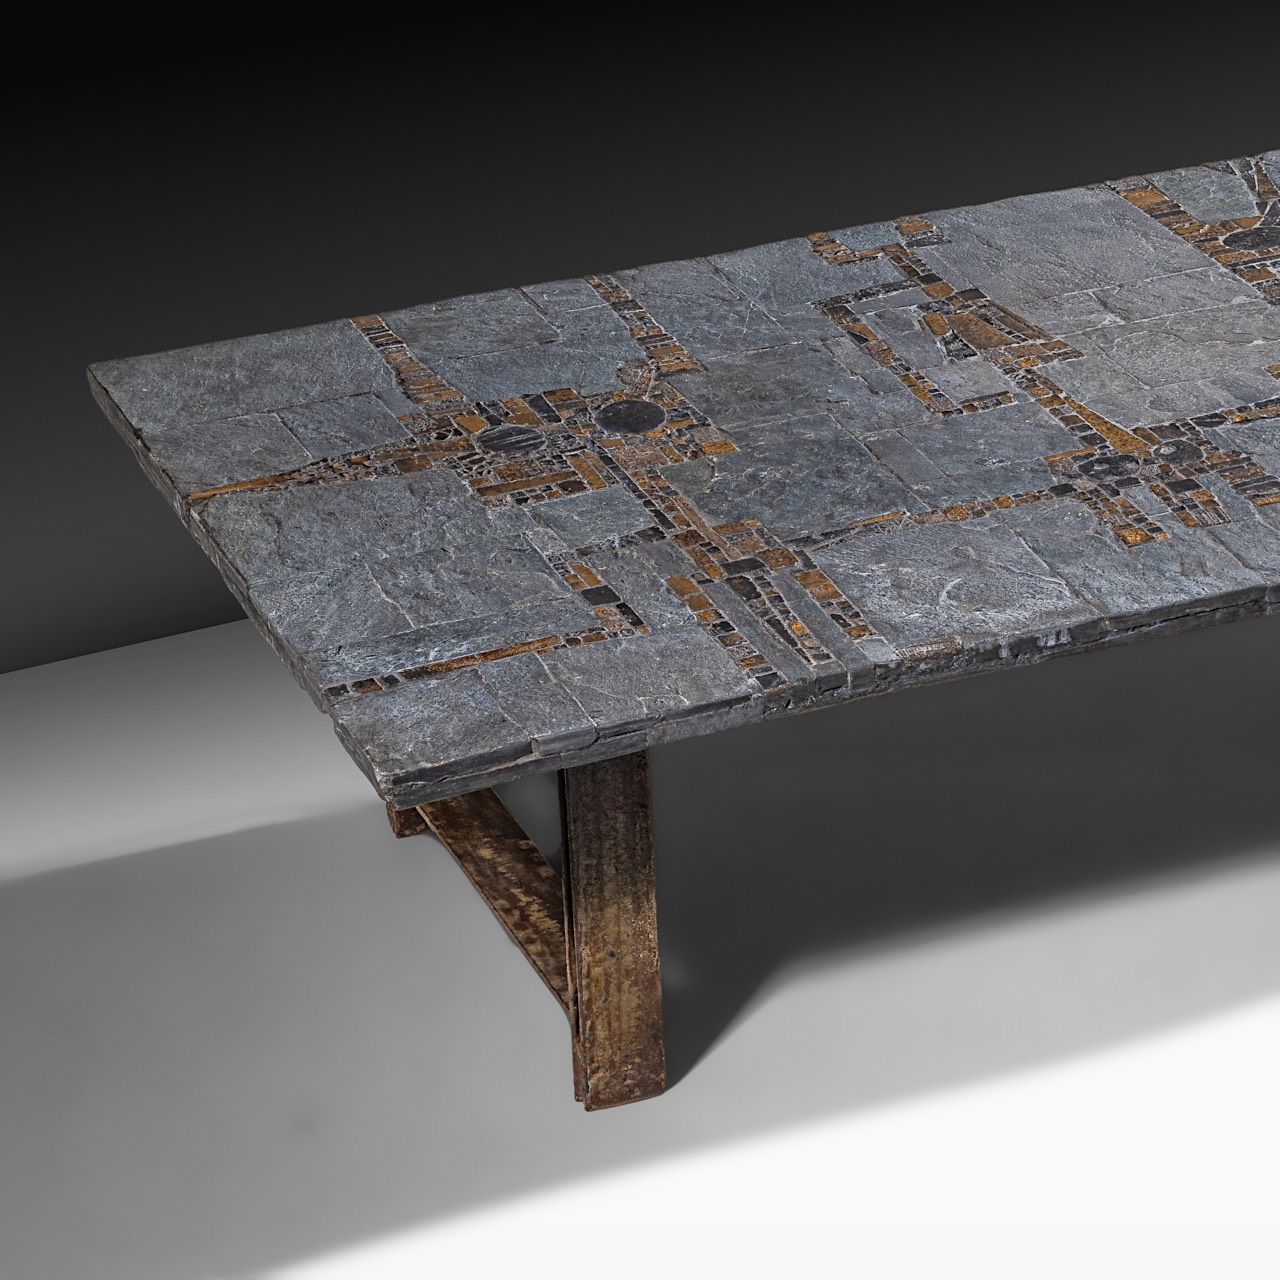 A vintage '60s Pia Manu coffee table, slate stone and gilt-glazed ceramic table top on a steel frame - Image 6 of 16